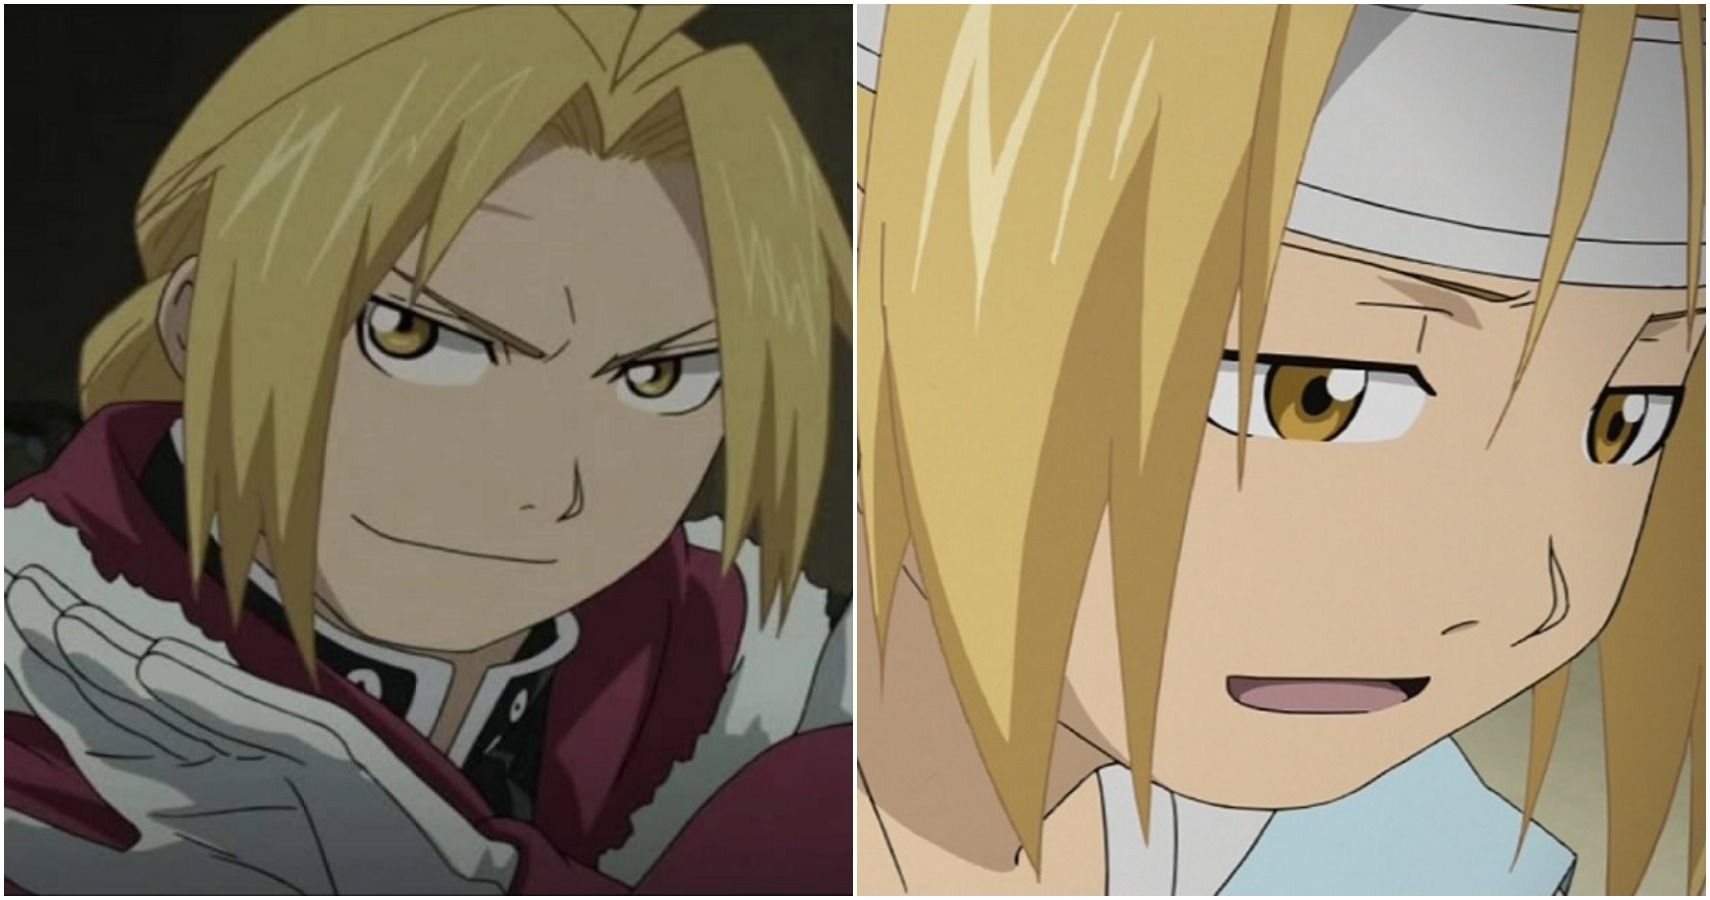 edward elric strengths weaknesses featured image fullmetal alchemist